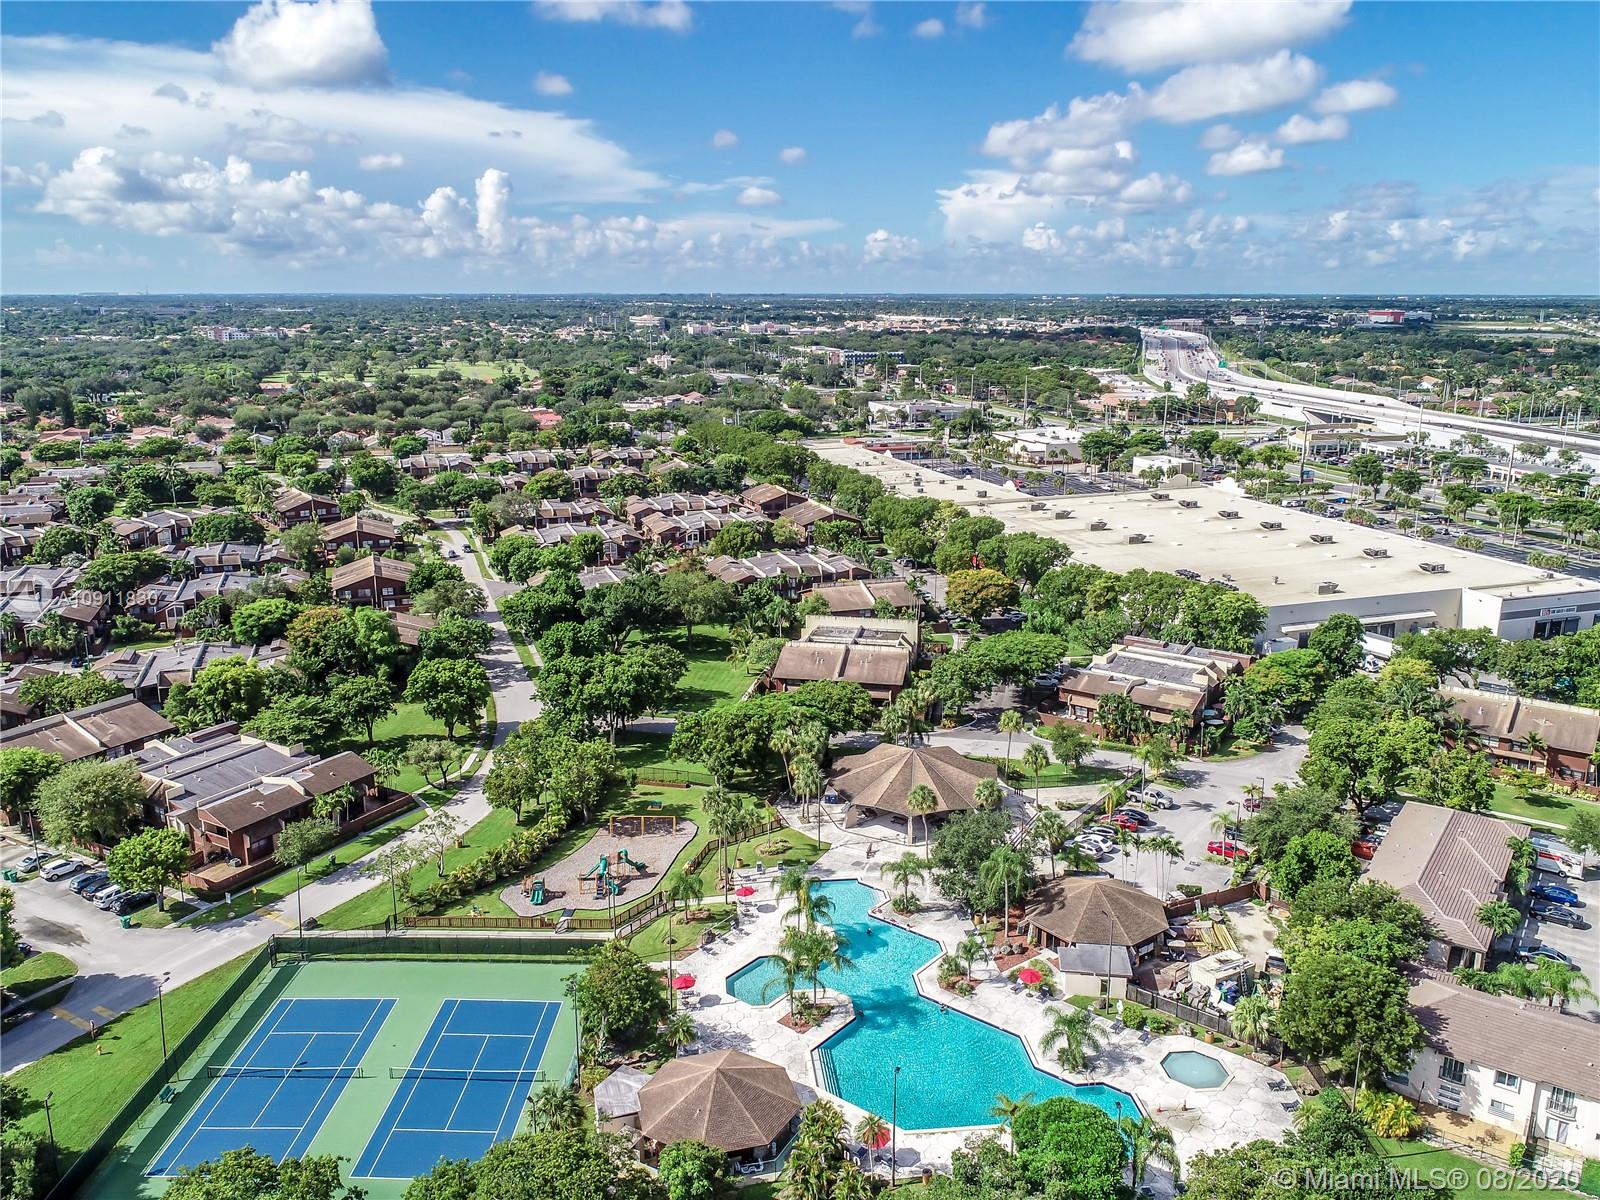 Enjoy Resort Style Community Amenities Such as Pool,Playground, Tennis Courts,24 Hour Guard House,On-site Management. Beautifully Landscaped 90 acre Community is Pet Friendly with Walking & Jogging Trails & Lots of Parking.